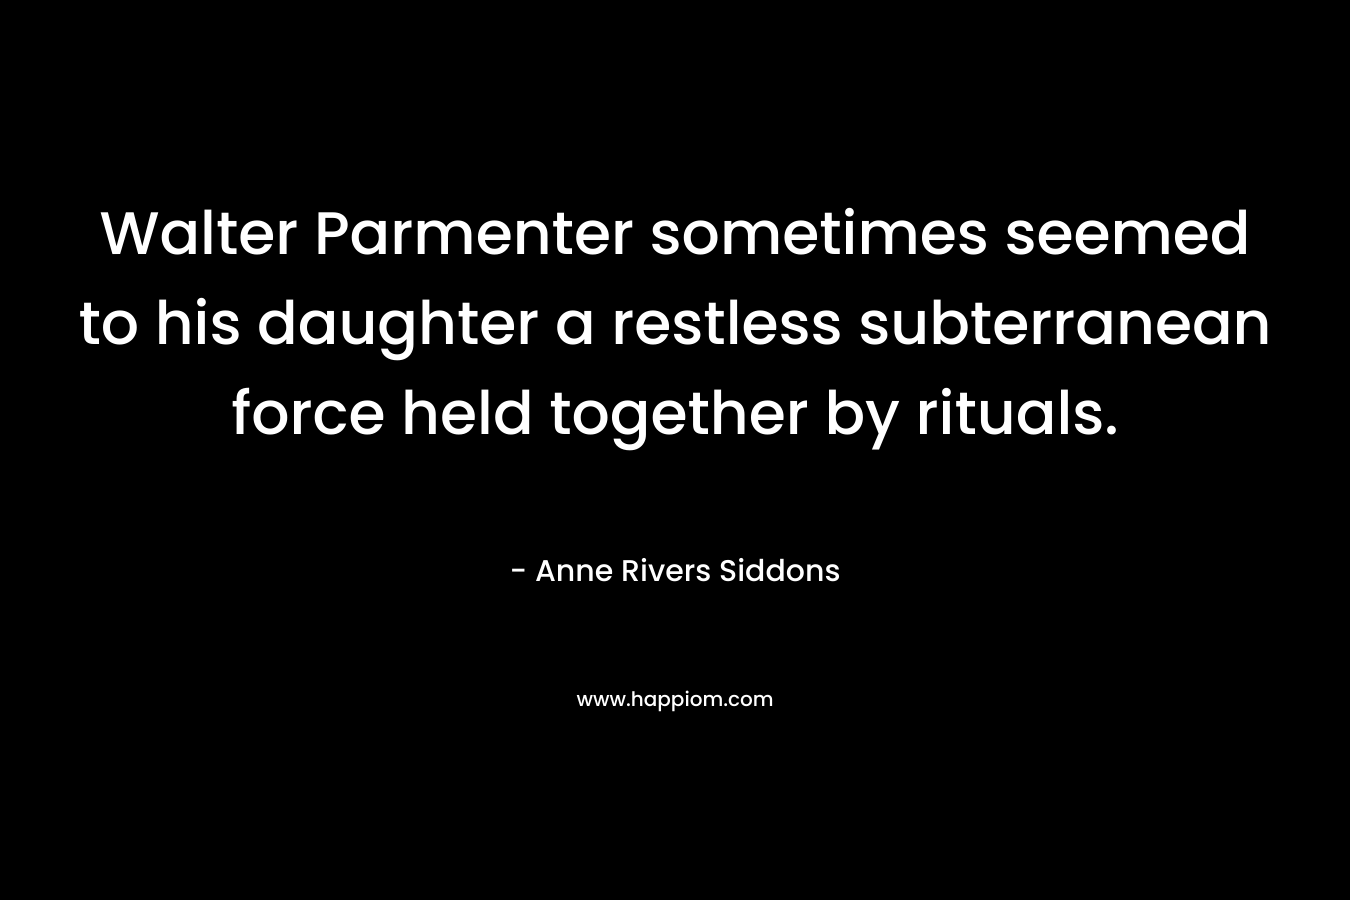 Walter Parmenter sometimes seemed to his daughter a restless subterranean force held together by rituals. – Anne Rivers Siddons